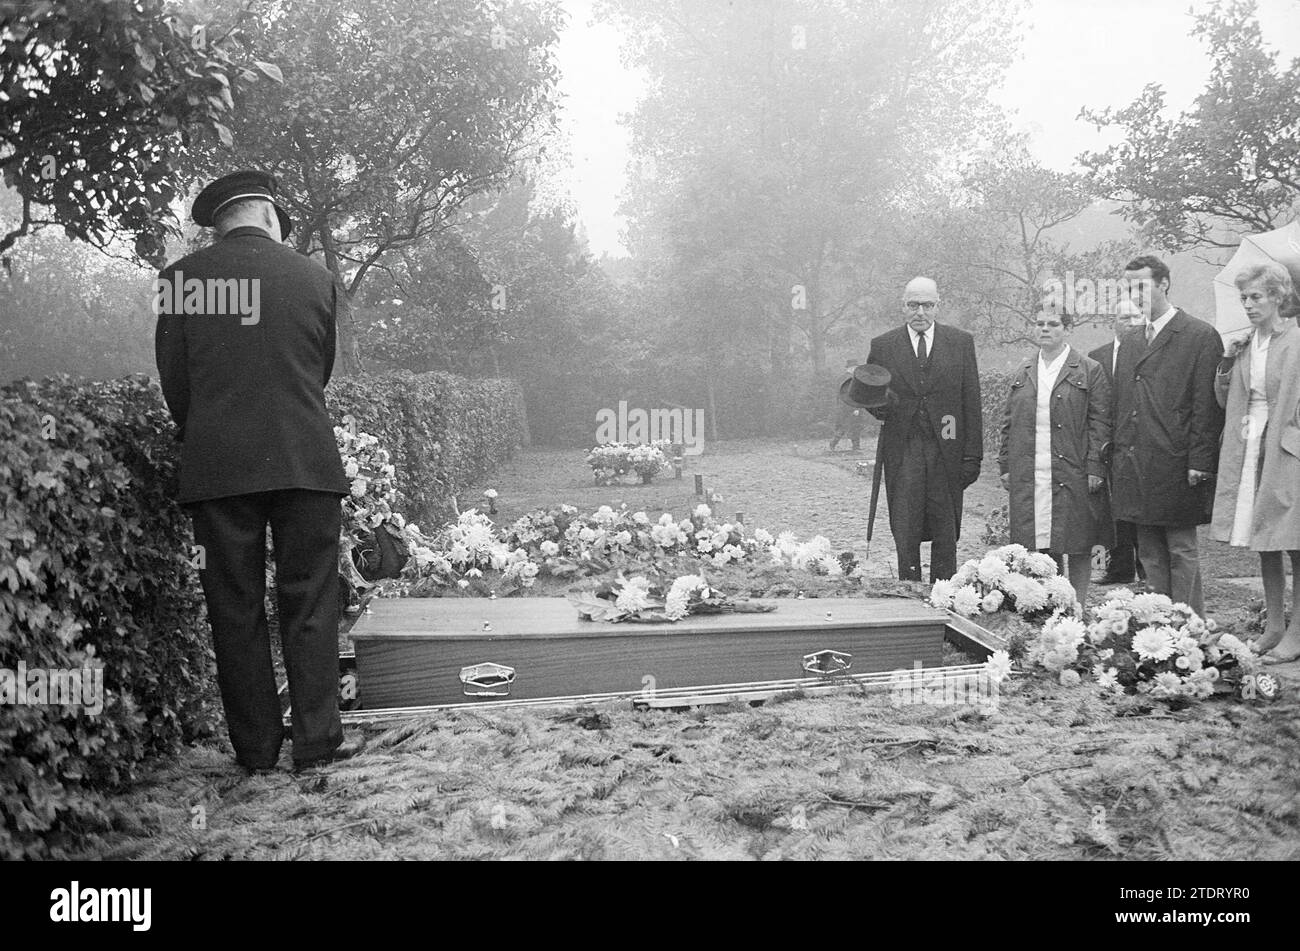 Funeral, Whizgle News from the Past, Tailored for the Future. Explore historical narratives, Dutch The Netherlands agency image with a modern perspective, bridging the gap between yesterday's events and tomorrow's insights. A timeless journey shaping the stories that shape our future Stock Photo